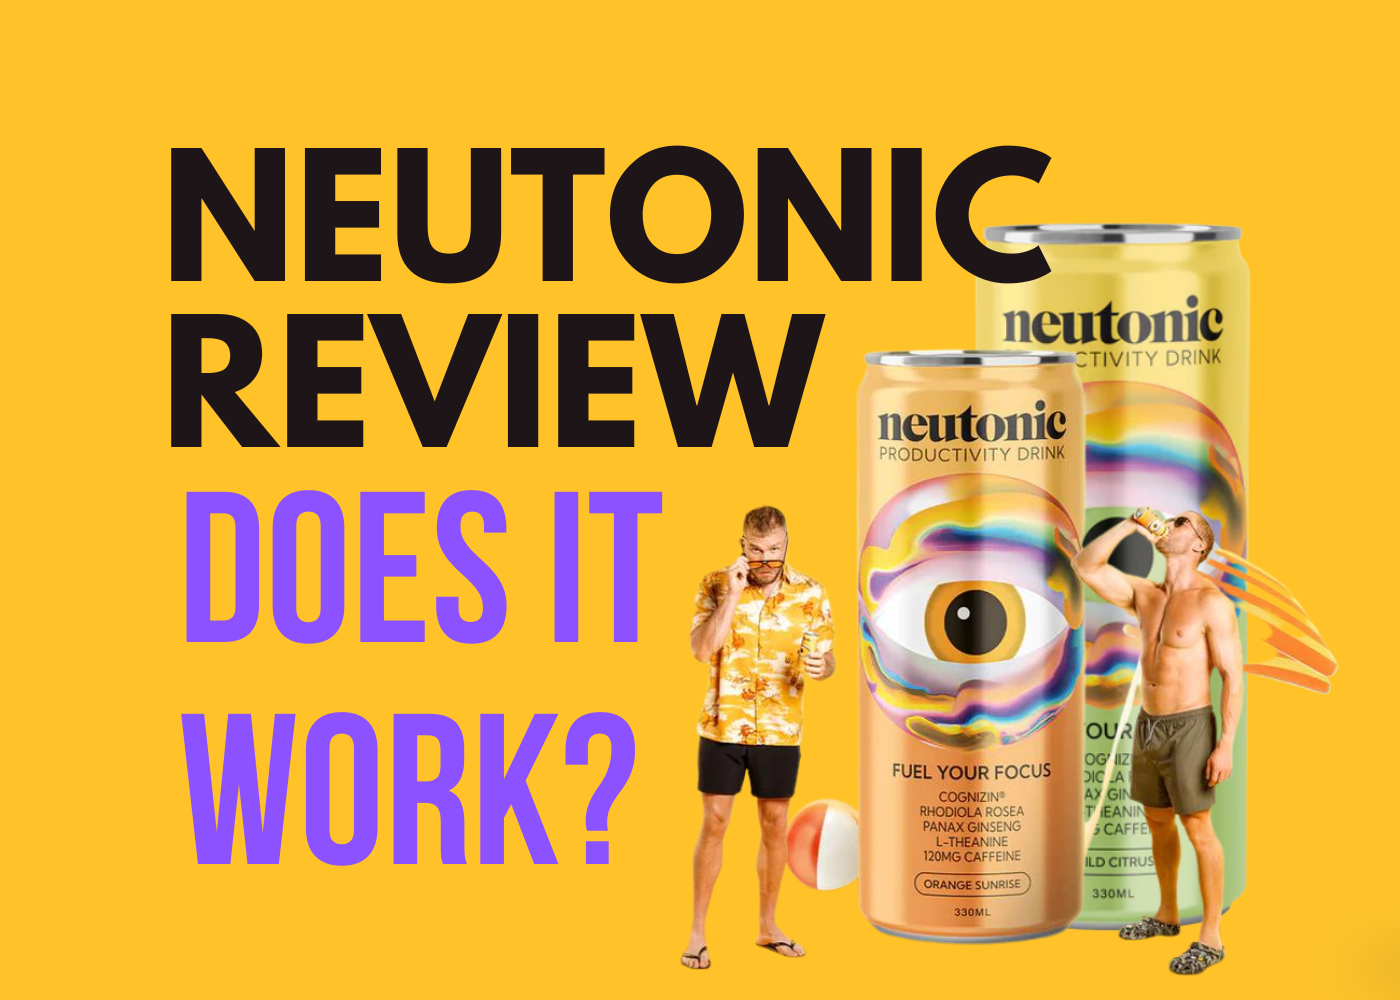 Neutonic Review - Does This Nootropic Drink Really Work?